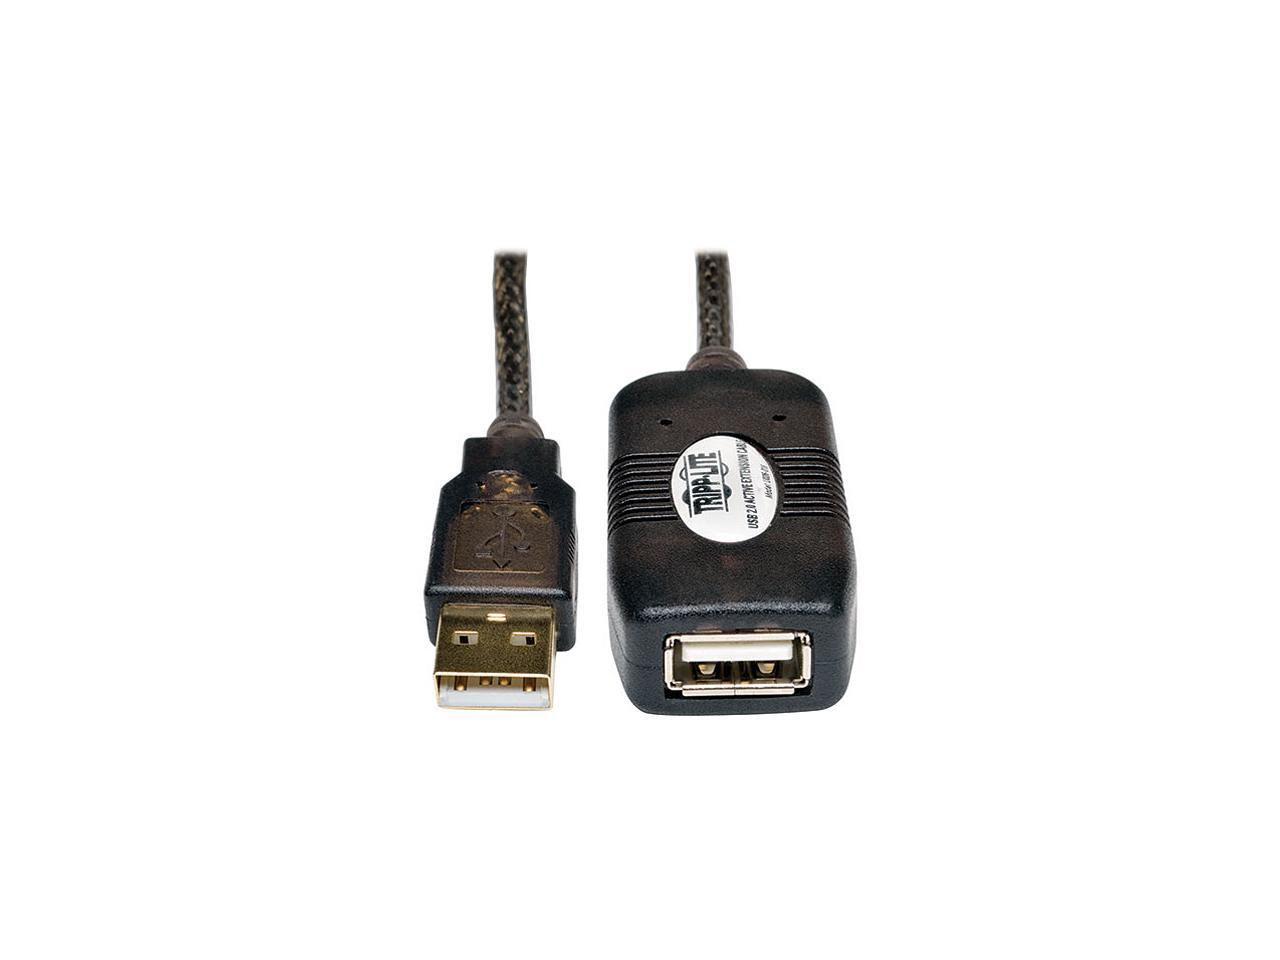 "Tripp Lite USB Active Extension Cable, USB 2.0 A Male to A Female Cable, High Speed, 16 ft. (U026-016)" - image 1 of 2